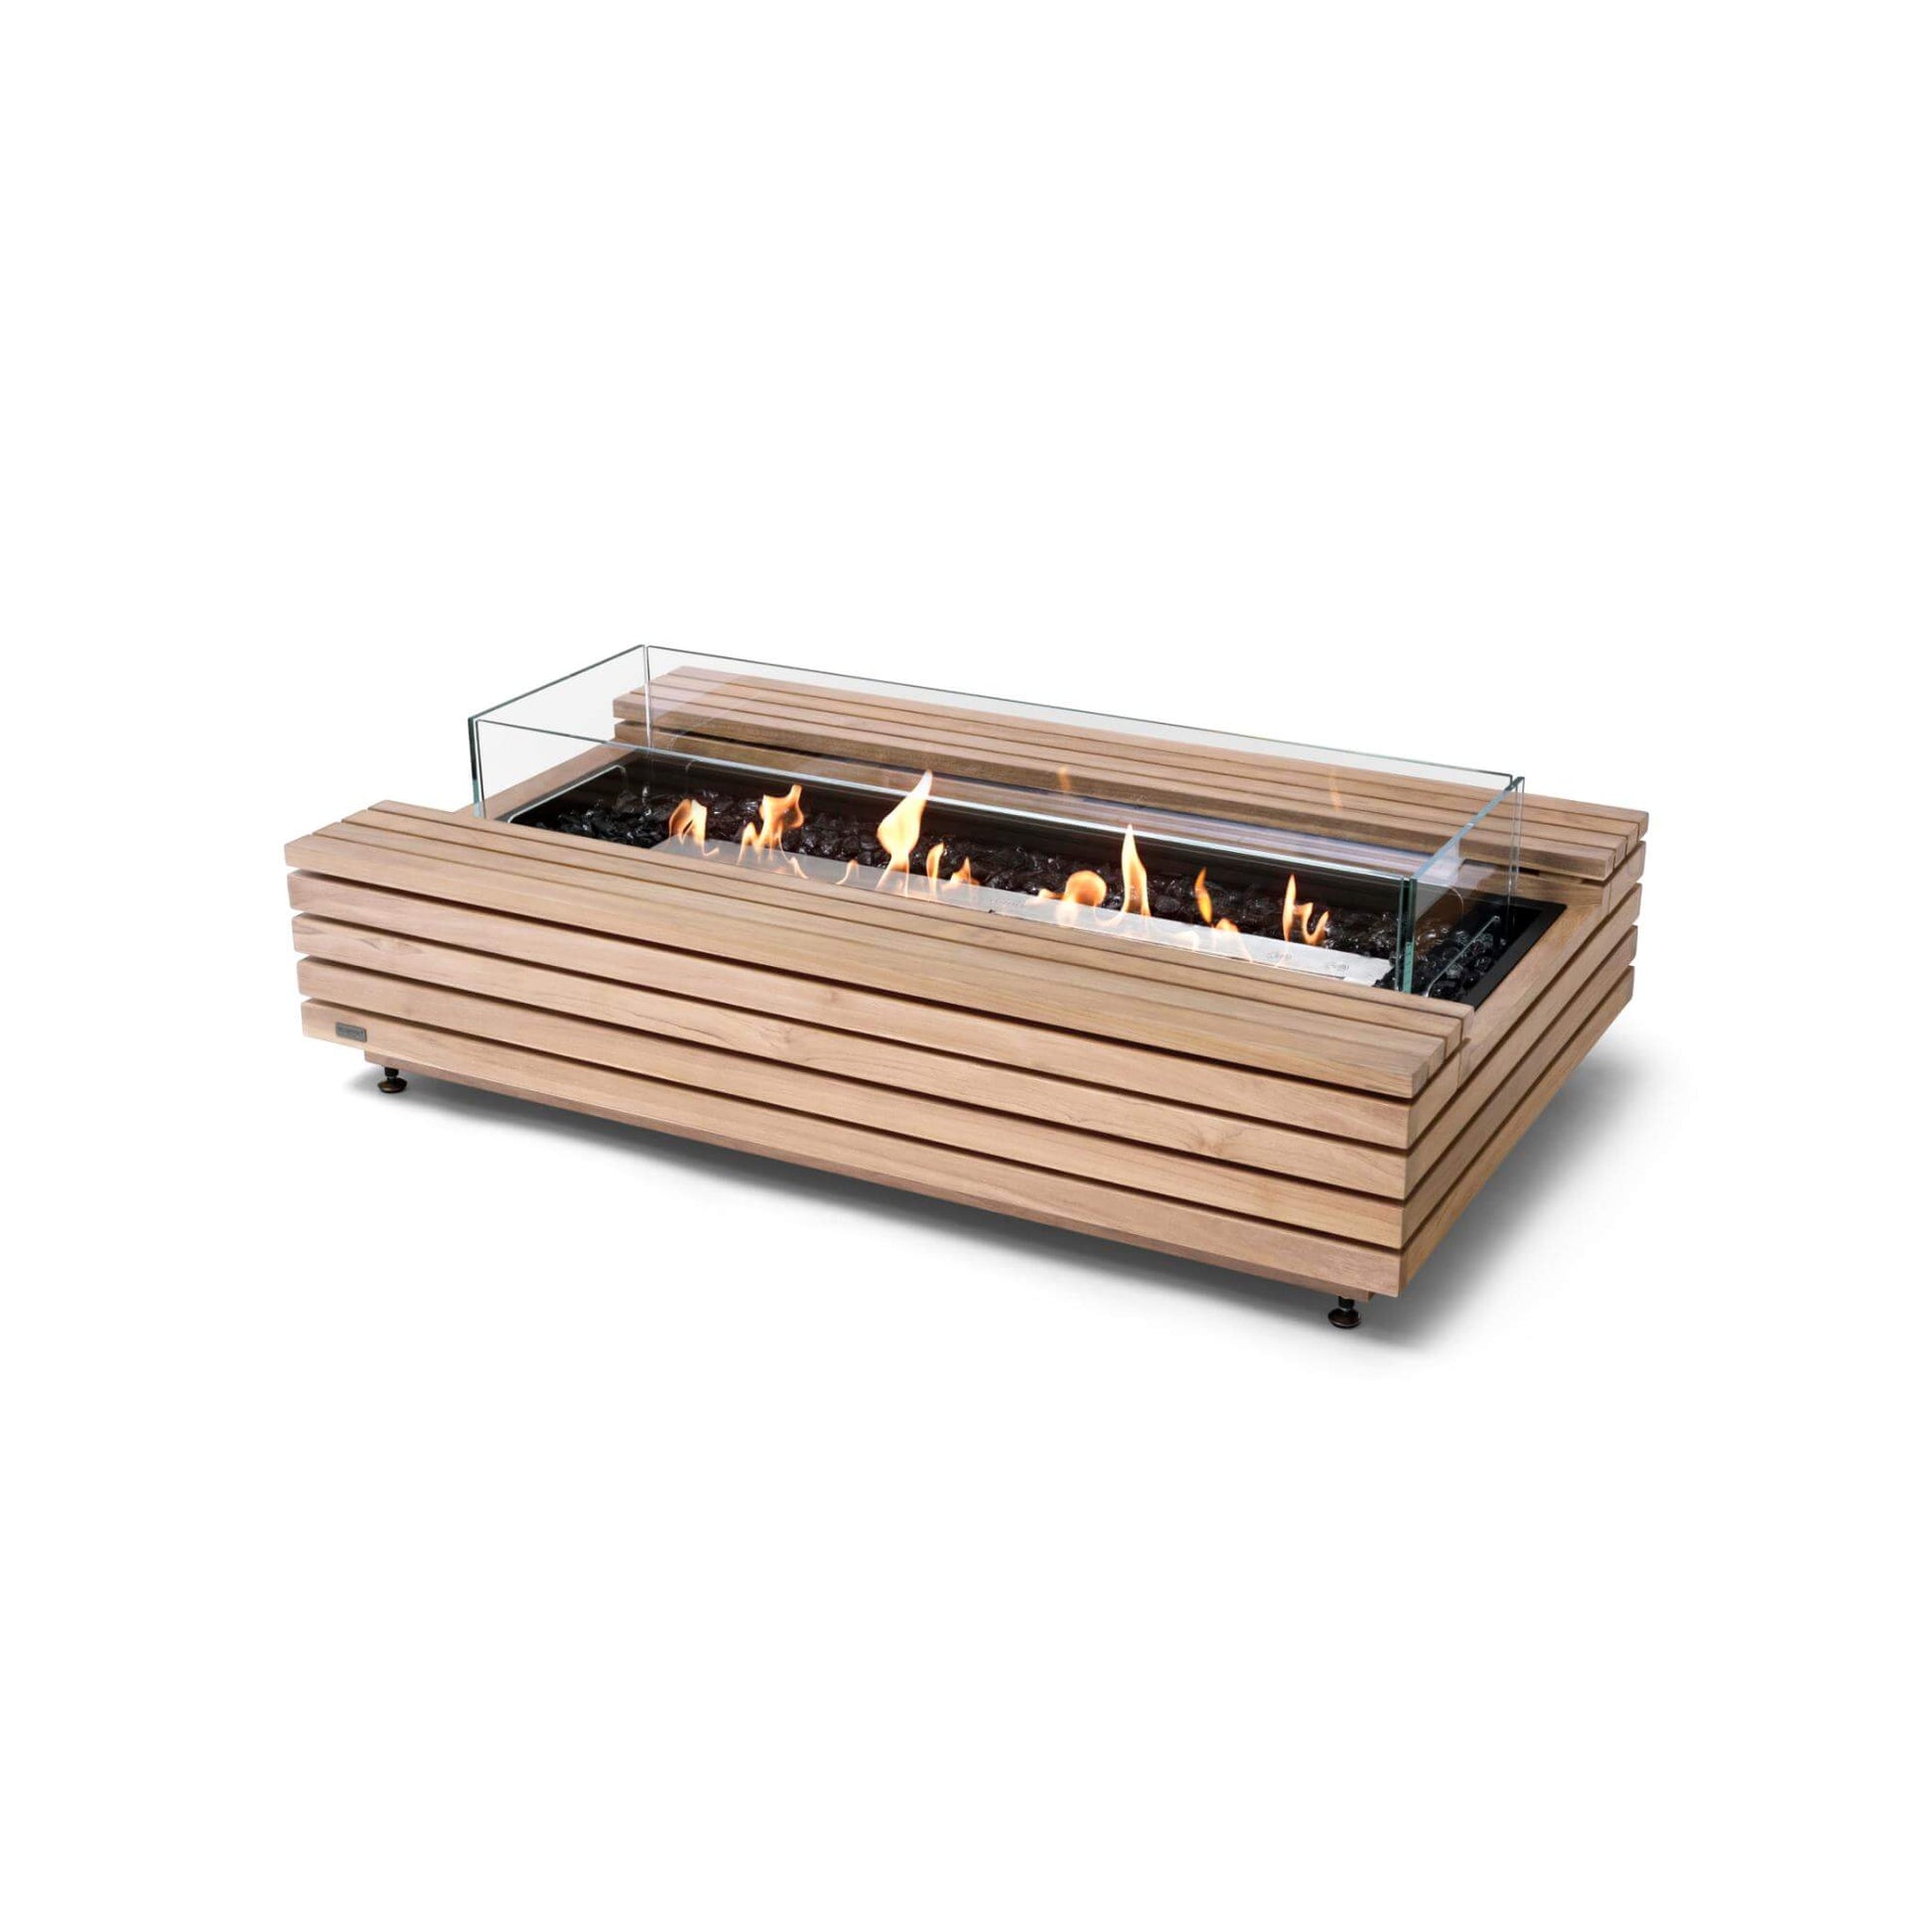 Cosmo 50 Linear Bio Ethanol Concrete Fire Pit Coffee Table with stainess steel burner  in Teak wood with glass screen for Indoor & Outdoor Heating by Ecosmart Fire